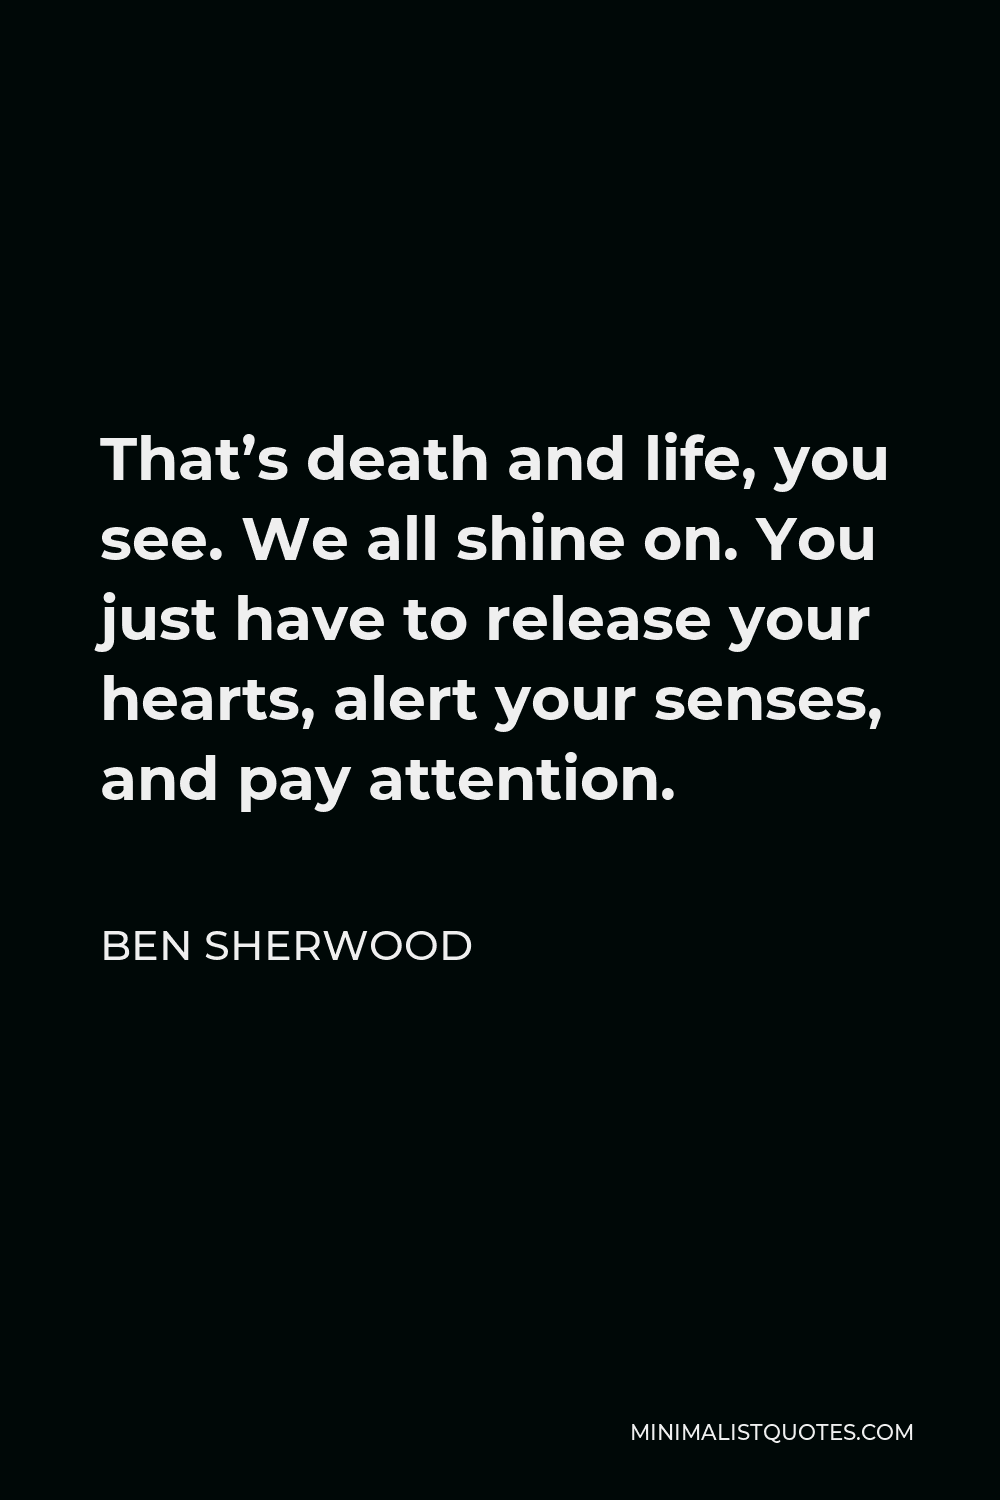 Ben Sherwood Quote - That’s death and life, you see. We all shine on. You just have to release your hearts, alert your senses, and pay attention.